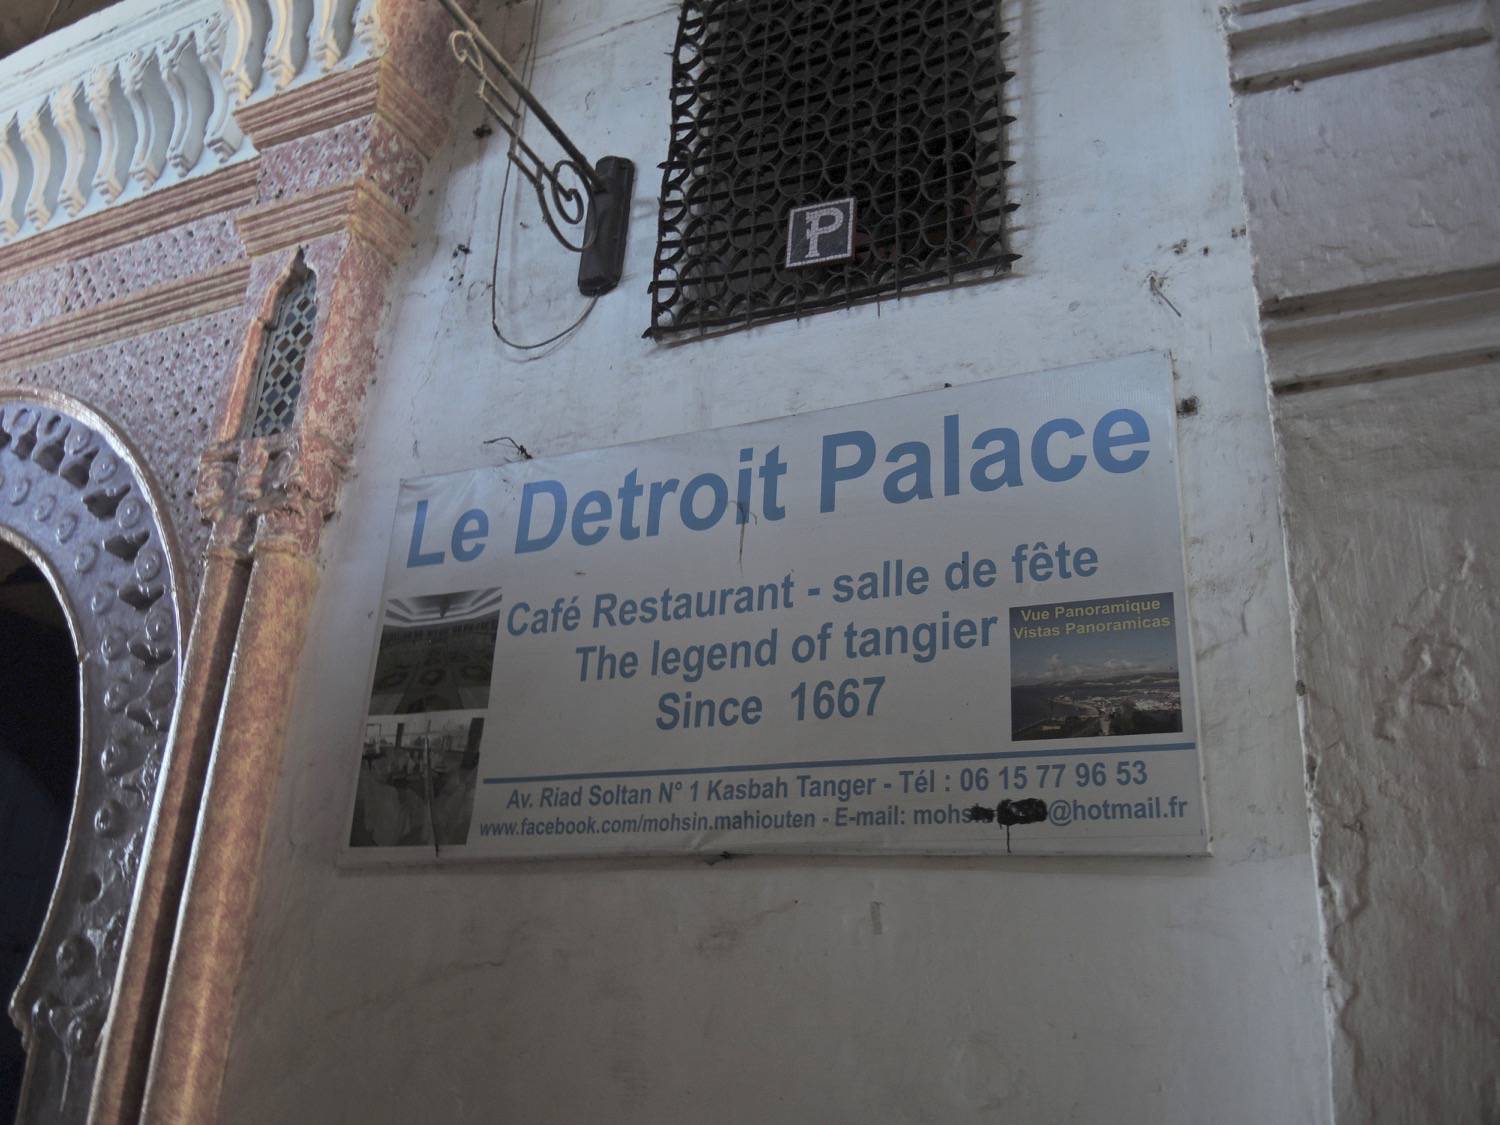 Entry to the Detroit Palace